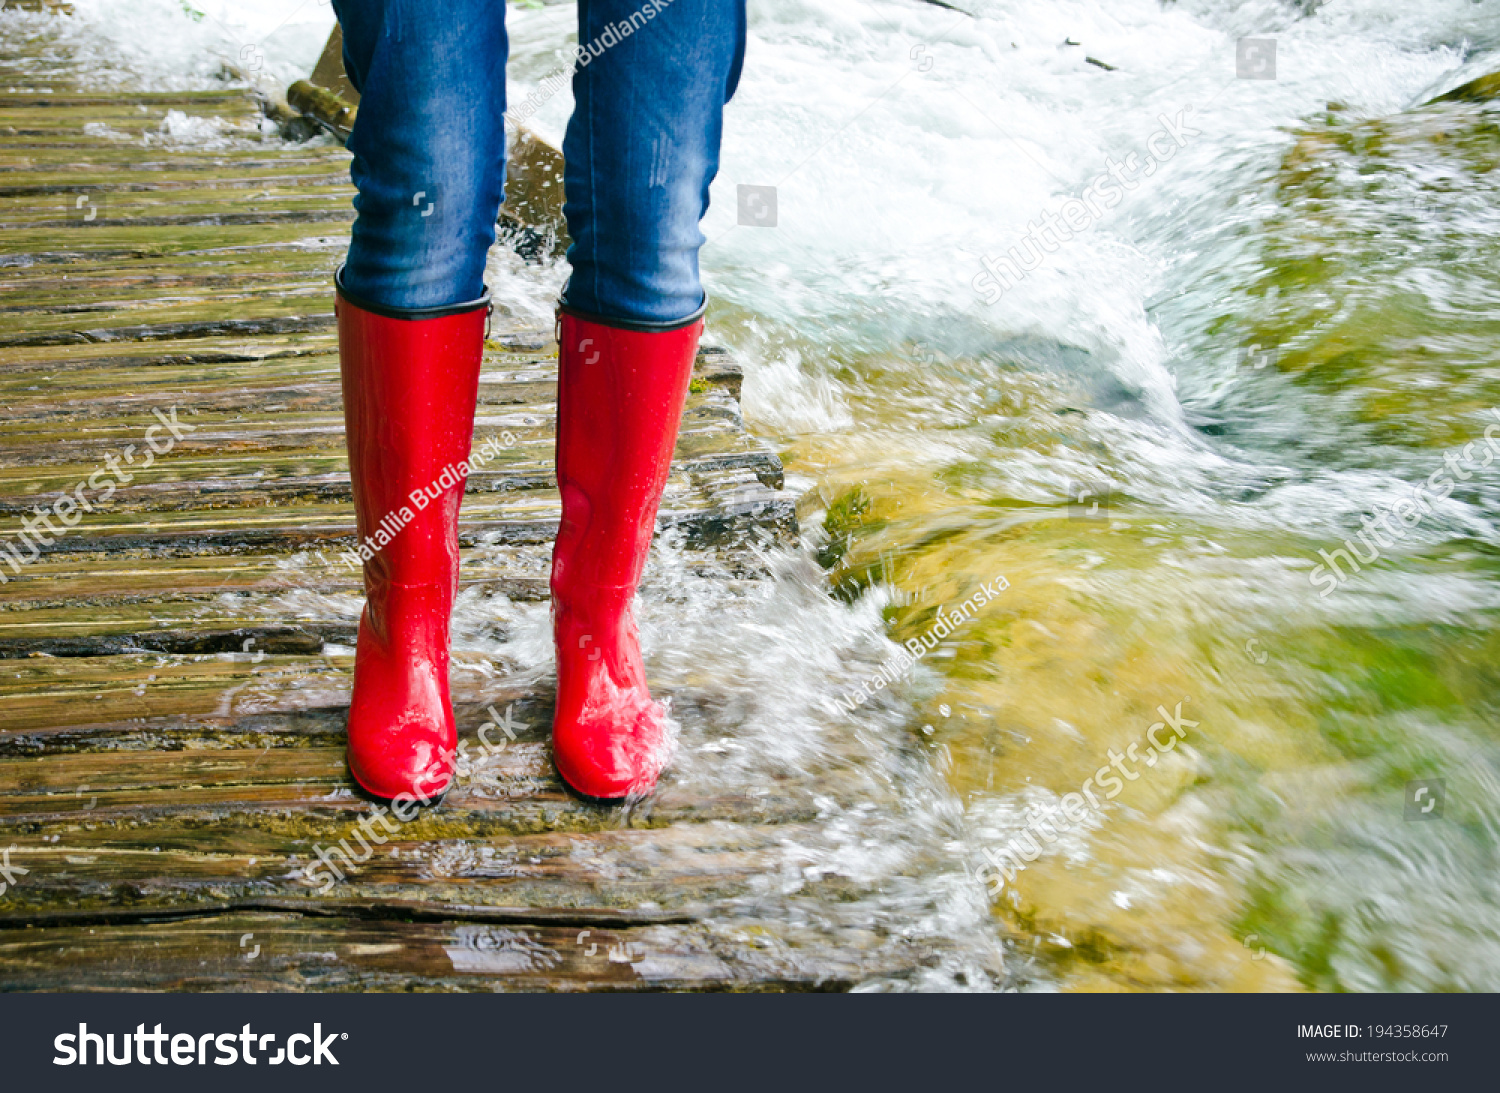 Red Rubber Boots Water River Overflowed Stock Photo 194358647 ...